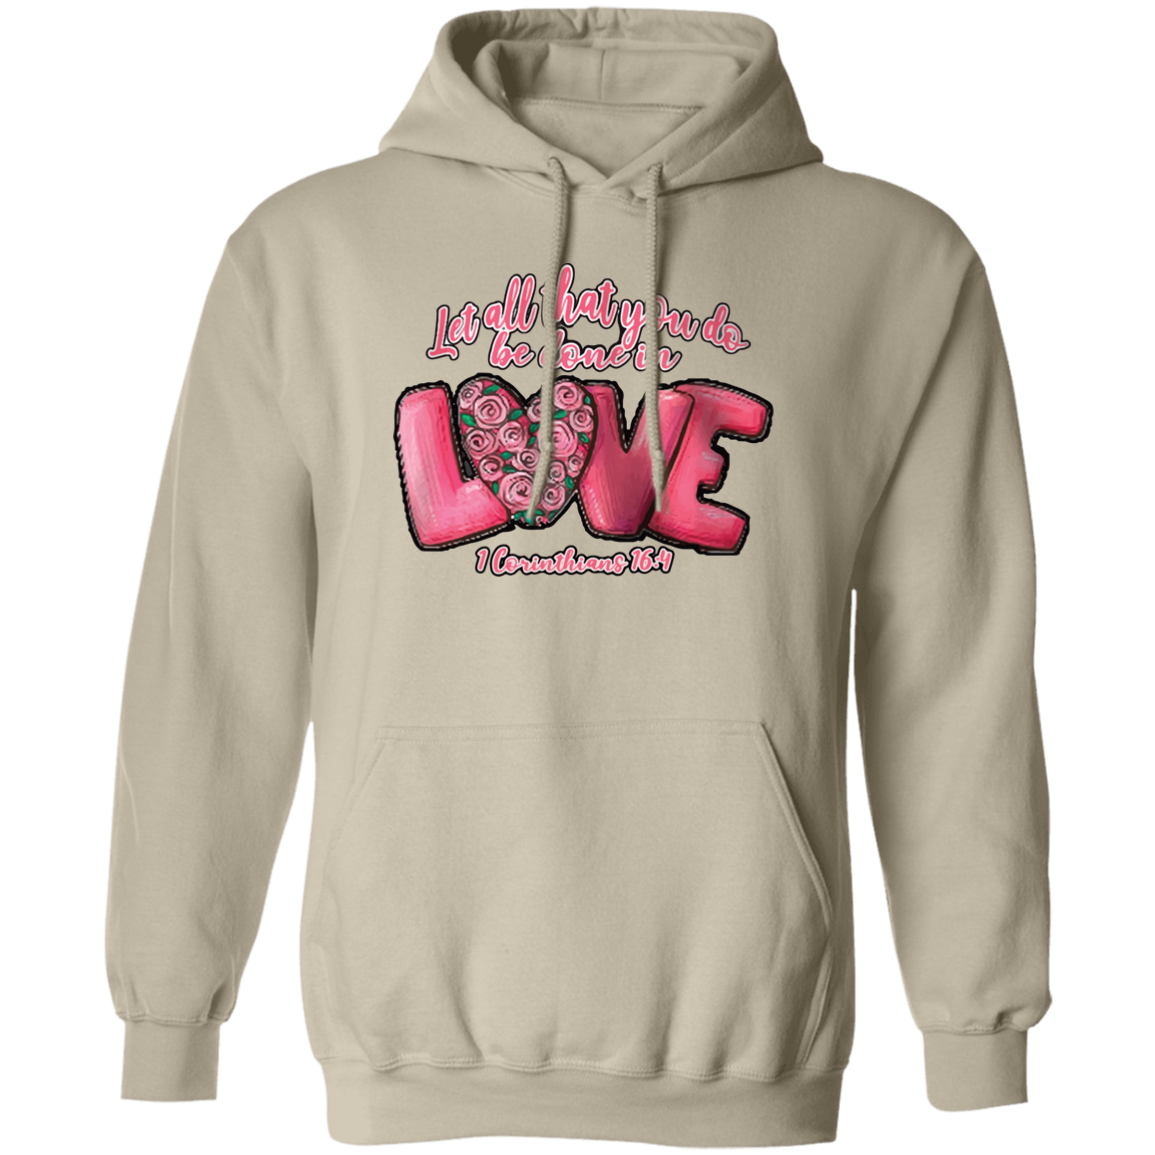 Let All That You Do Be Done In Love 1 Corinthians 16:14 Pullover Hoodie